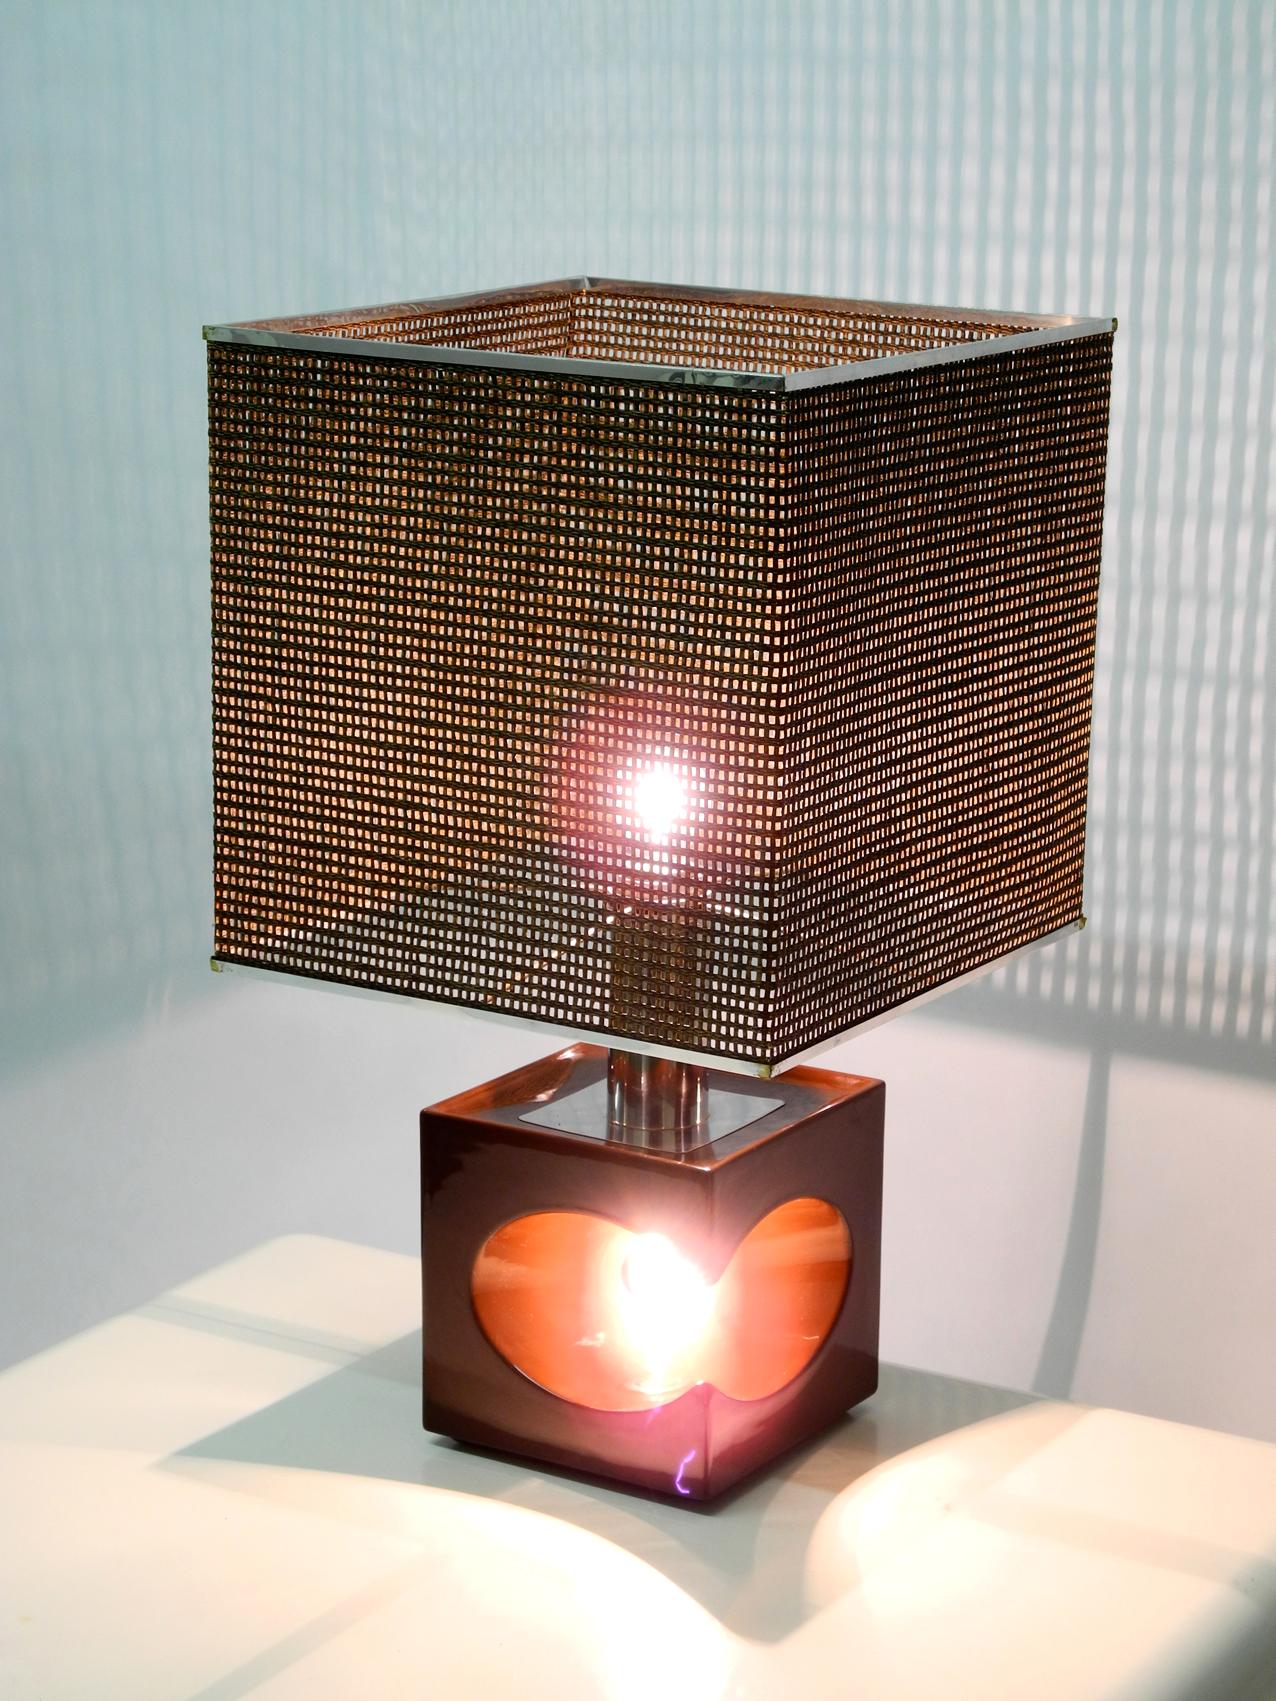 Space Age Very Interesting 1960s Italian Ceramic Table Lamp with Large Bast Basket Shade